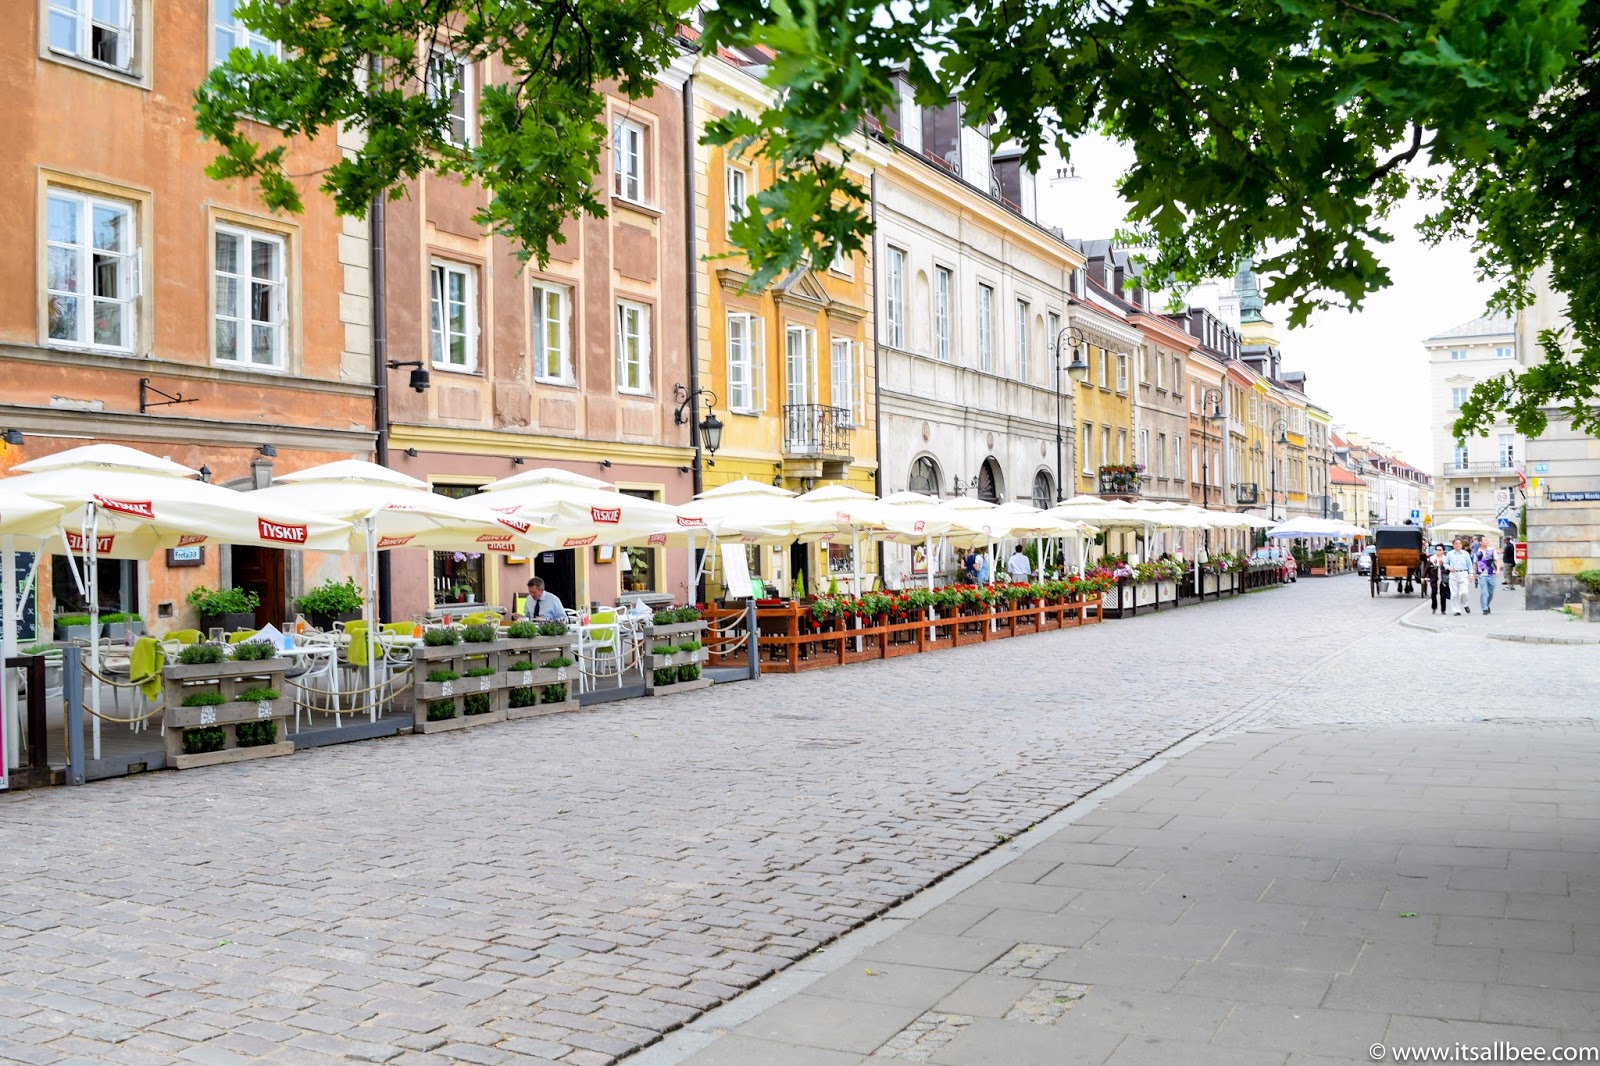 My Weekend In Warsaw | Top Things To See In Warsaw